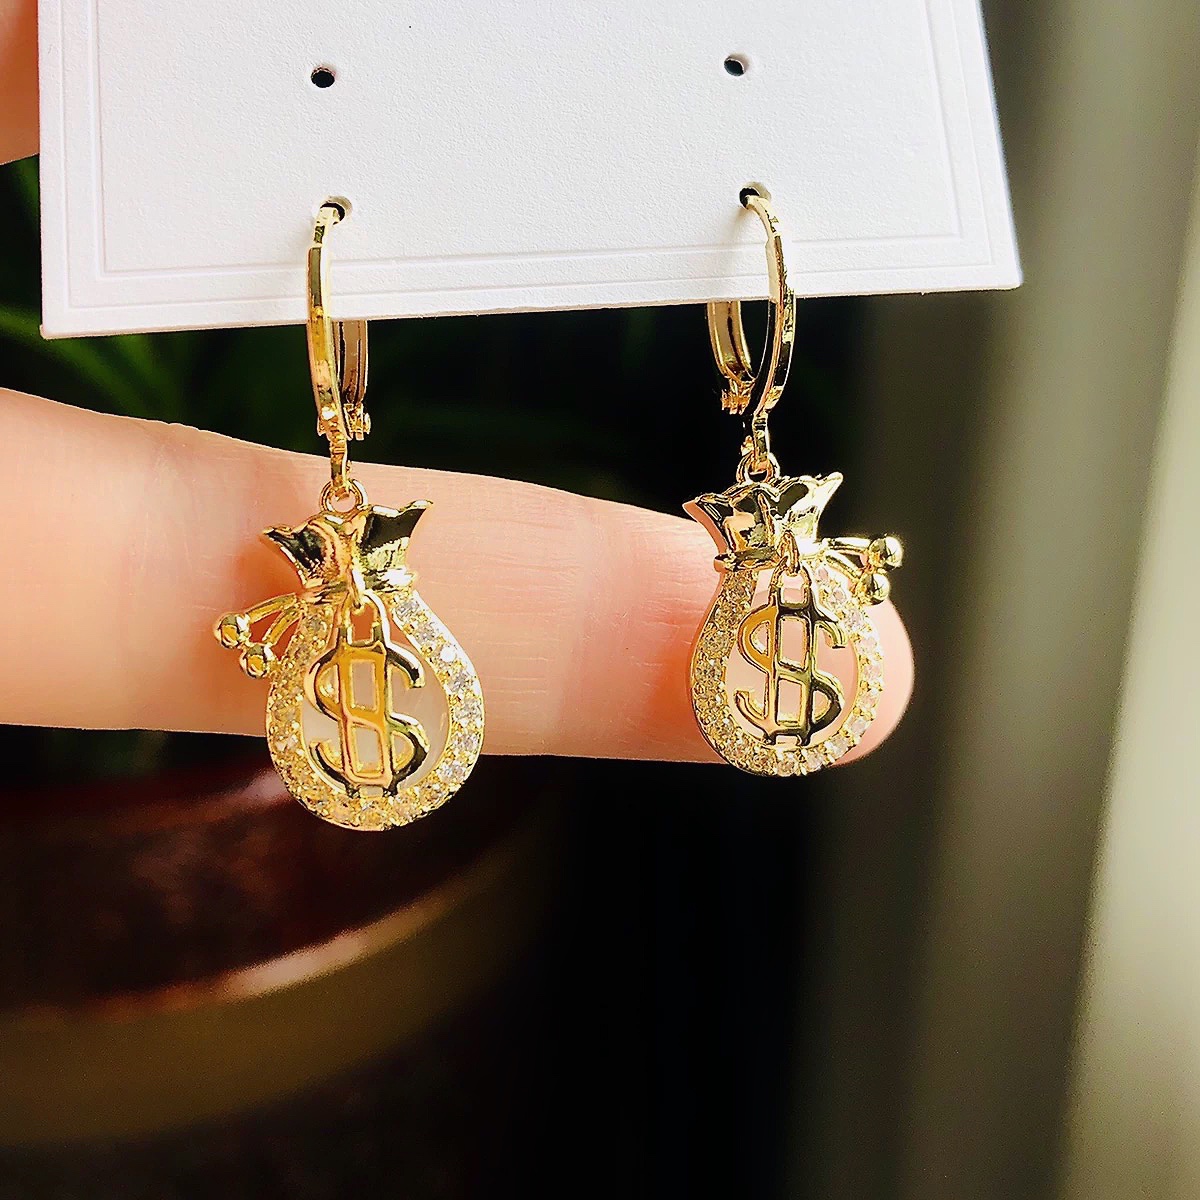 LAST DAY 70% OFF - Lucky Fortune Bag Earrings (Buy 2 Free Shipping)